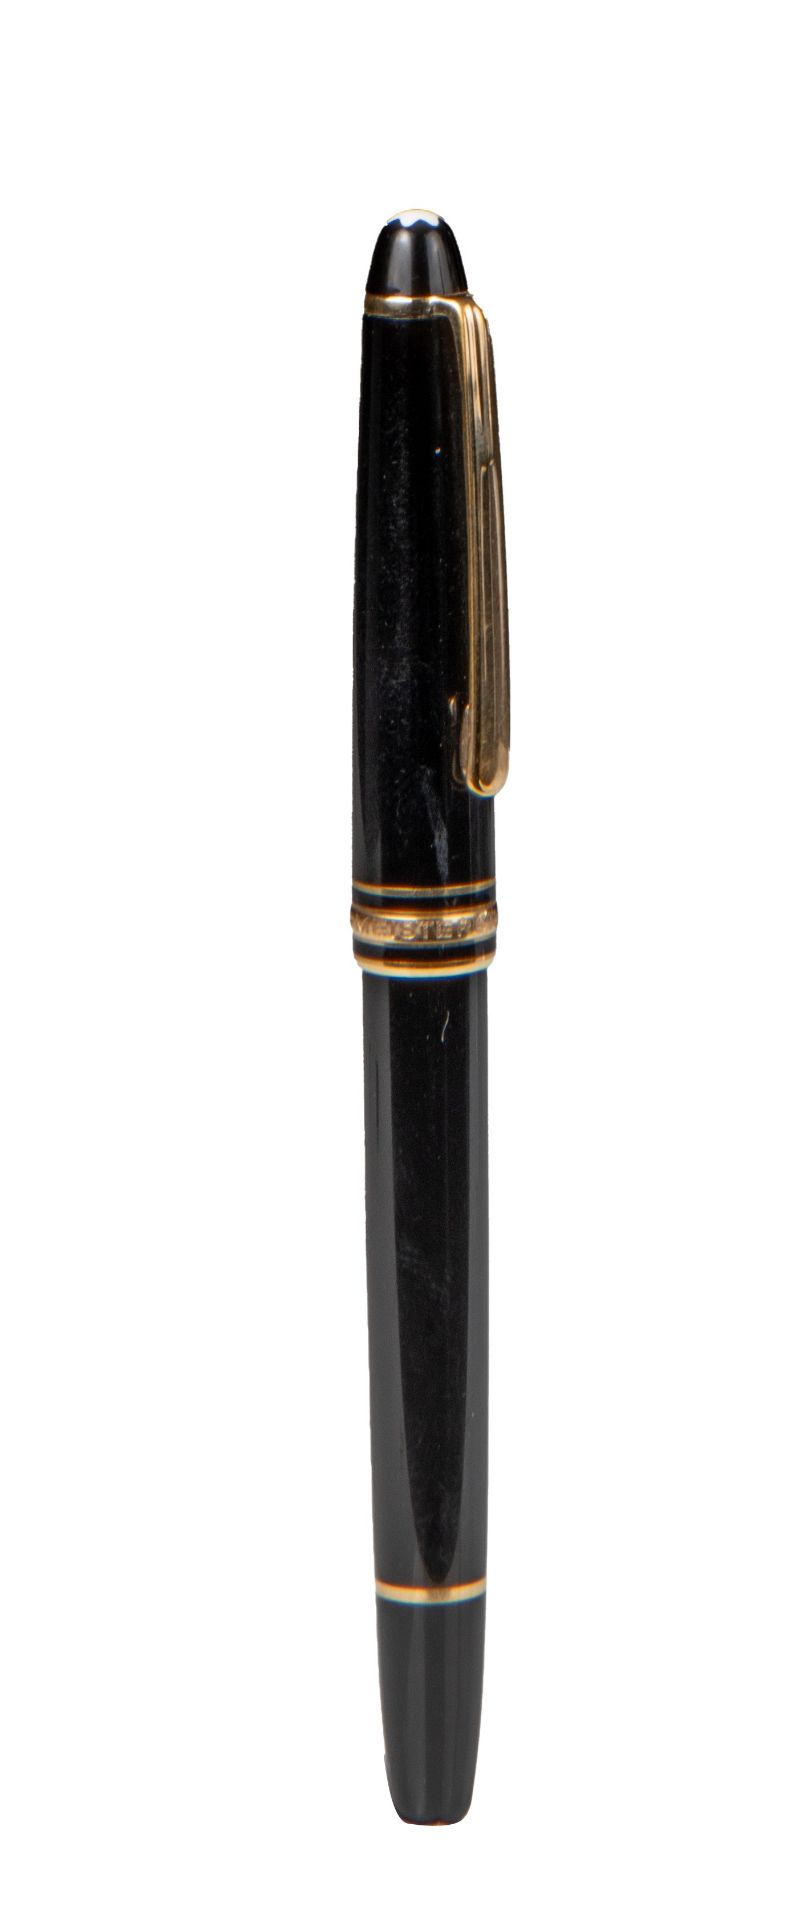 (T) A pair of 18ct yellow gold cuffs and a Montblanc pen - Image 8 of 12